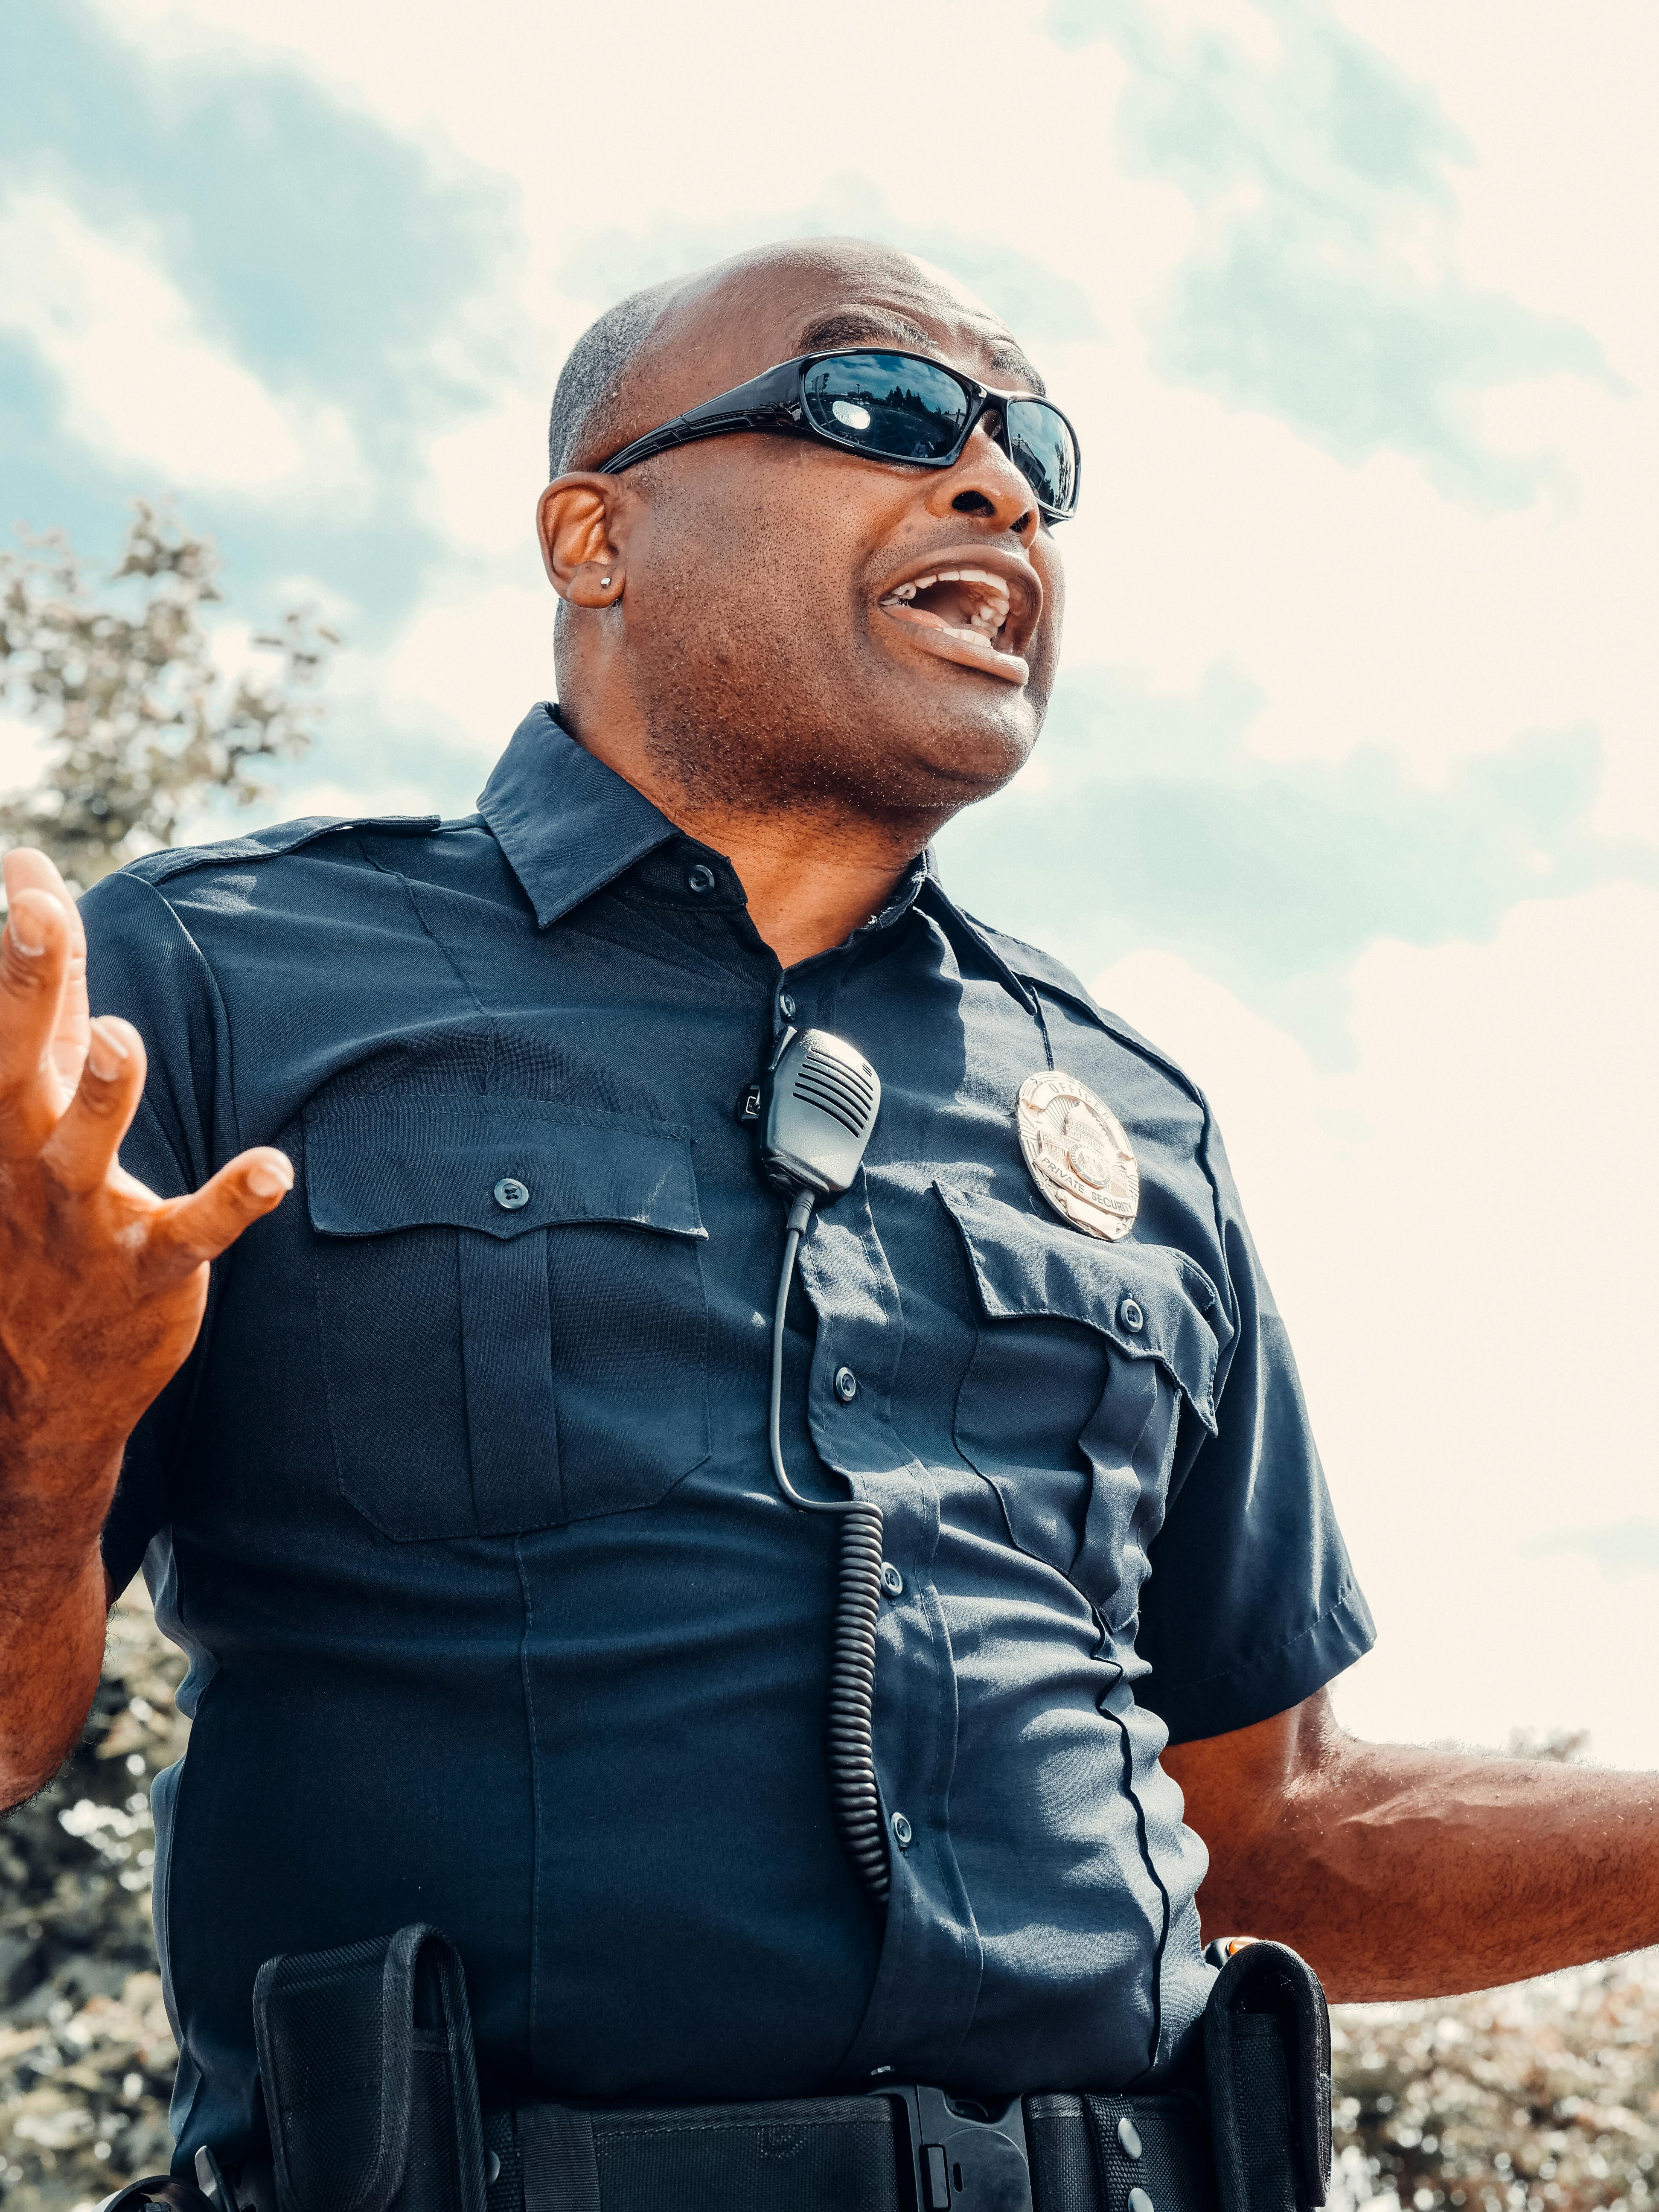 An angry policeman shouting | Source: Pexels